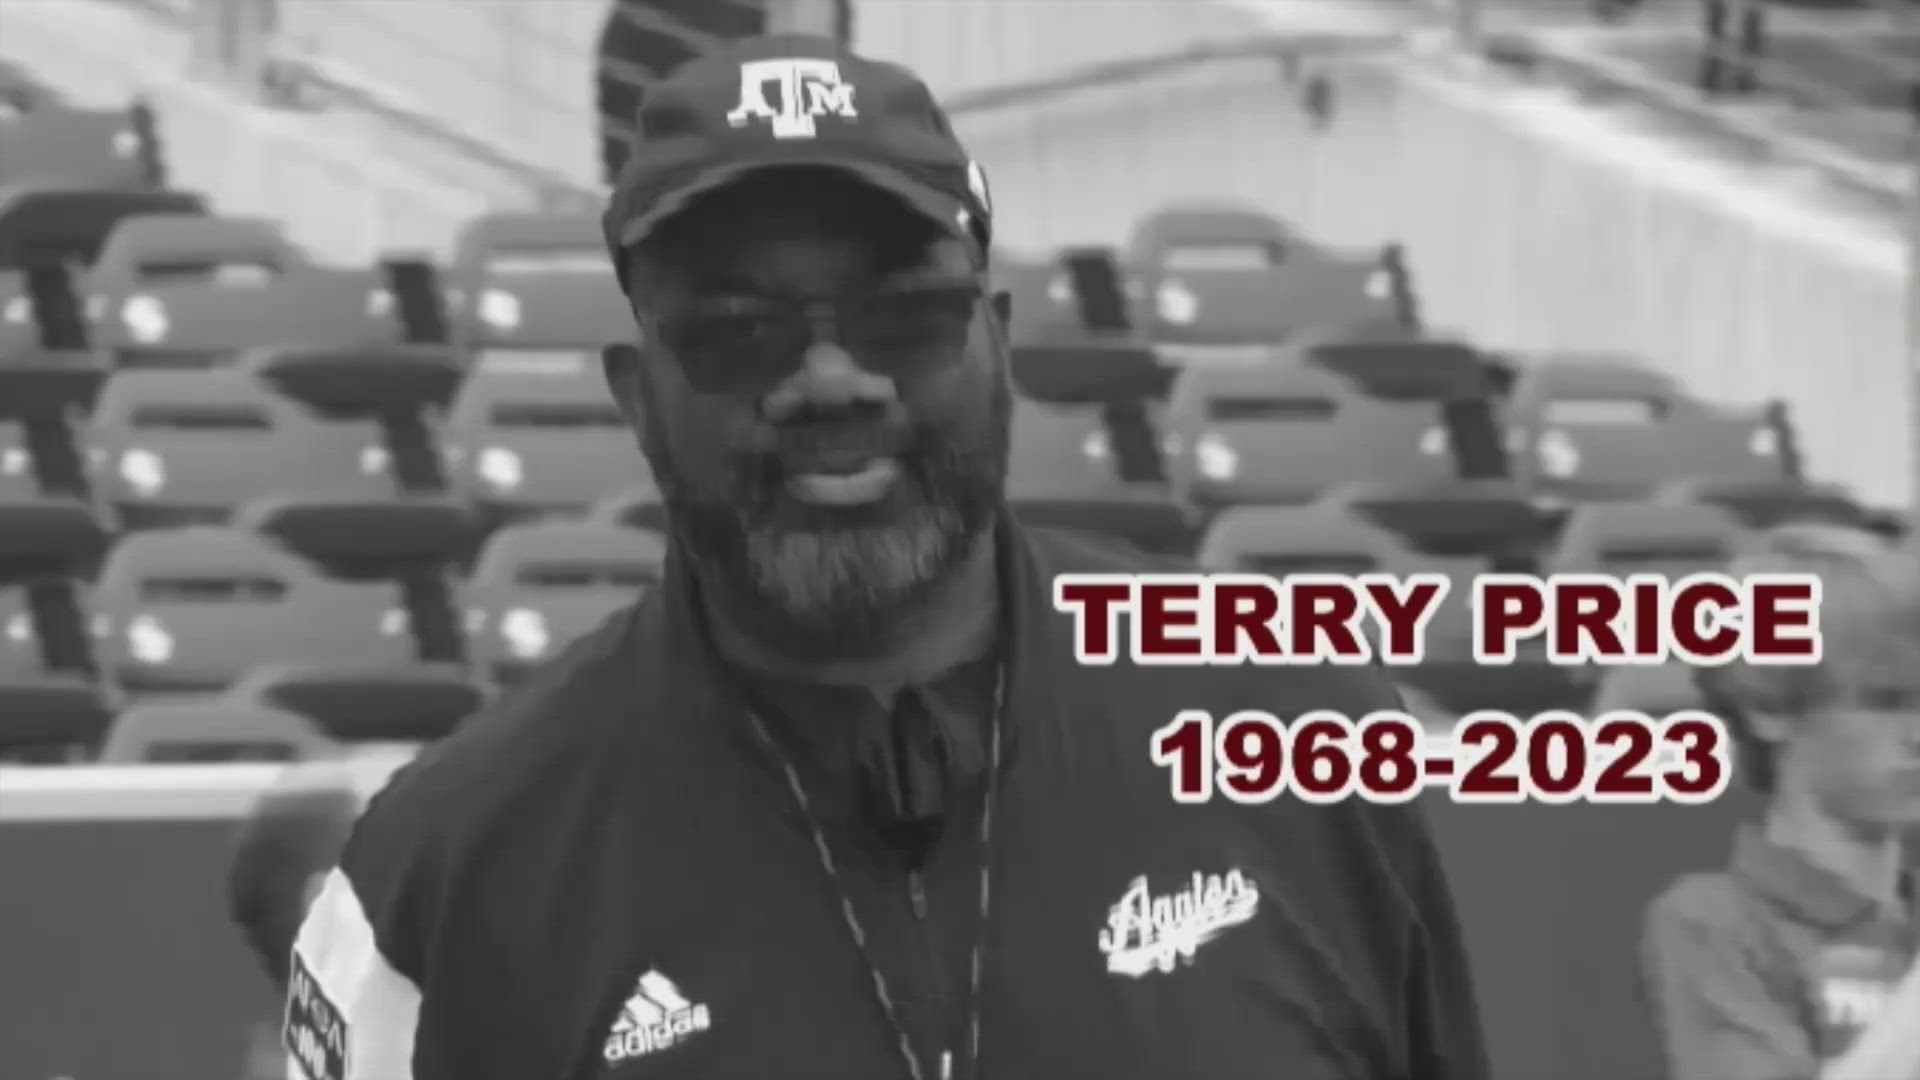 A celebration of life was held in Price's honor at the Central Church in Bryan. The event attracted former Aggie players and coaches from across the country.